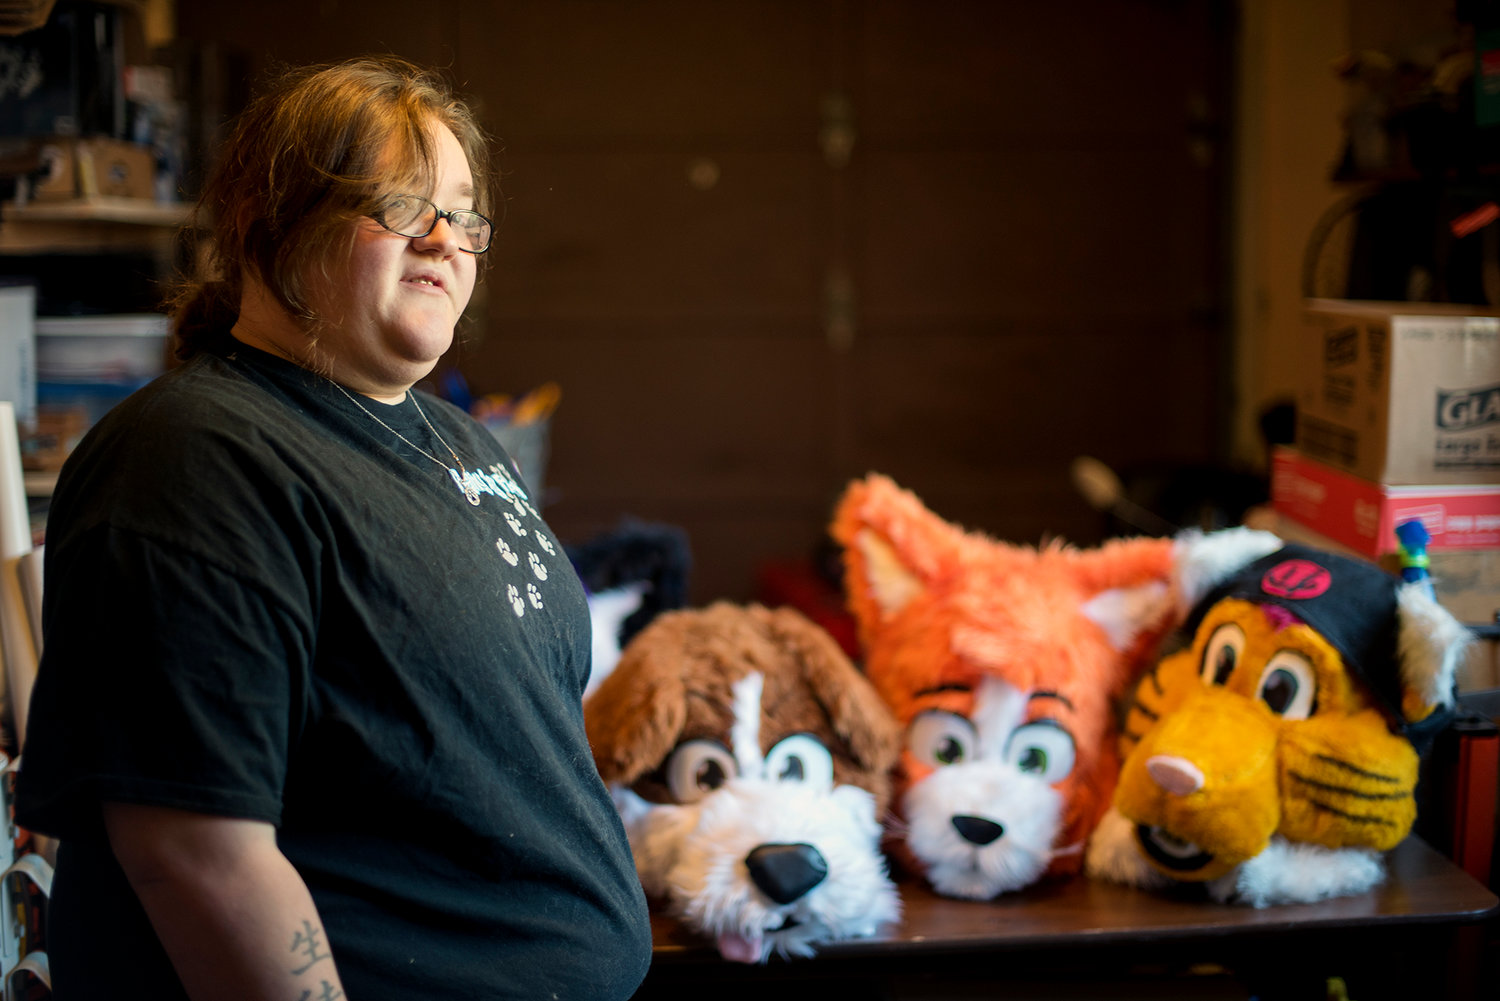 Amanda Grary stands in front of a trio of costume heads that she has designed and built from scratch at her home in Centralia on Tuesday, Nov. 11.